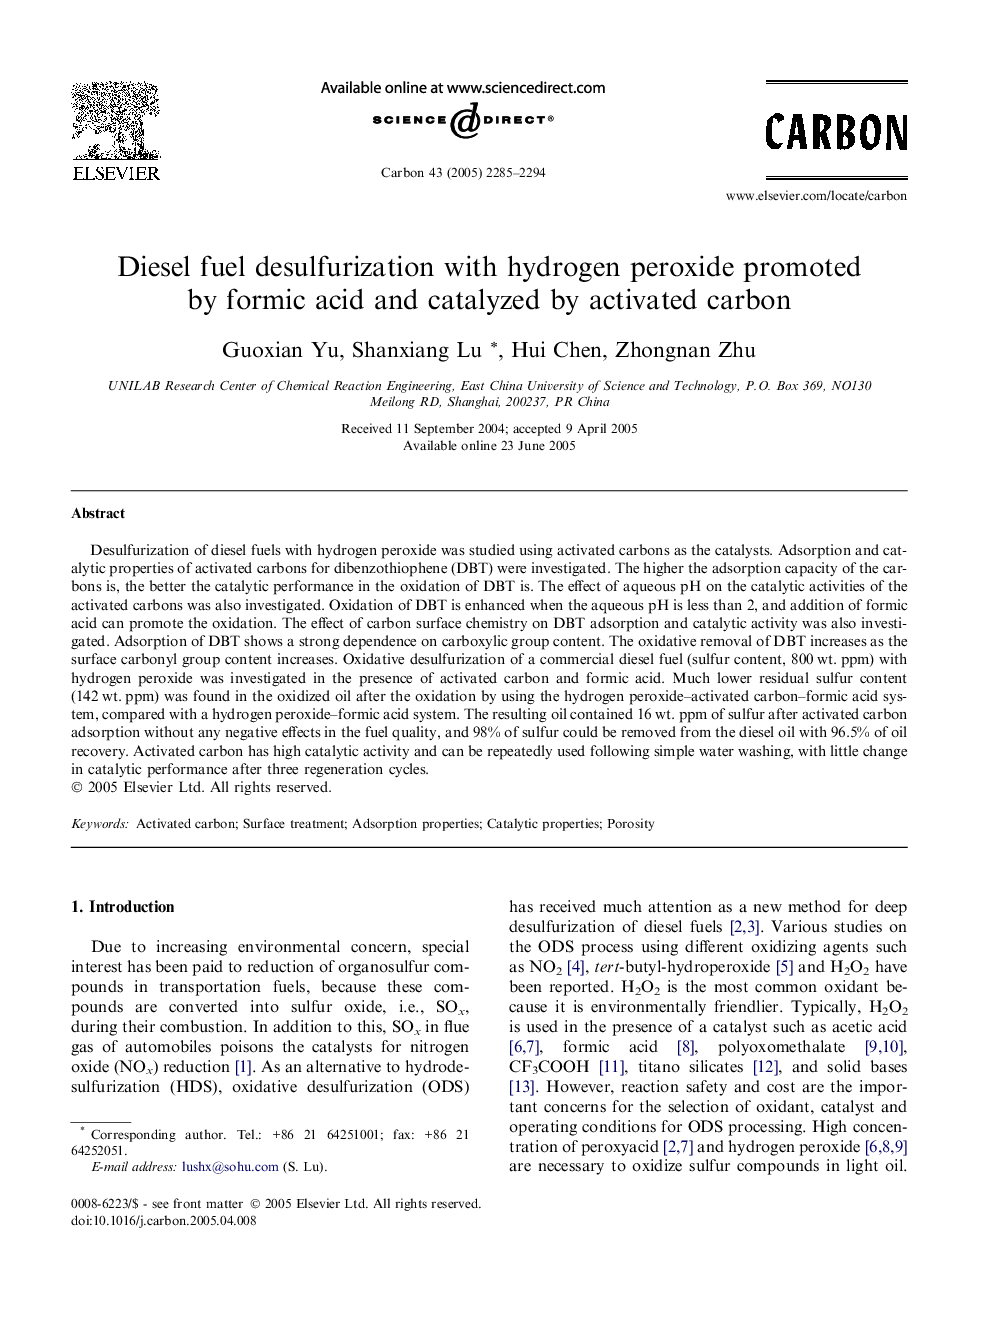 Diesel fuel desulfurization with hydrogen peroxide promoted by formic acid and catalyzed by activated carbon